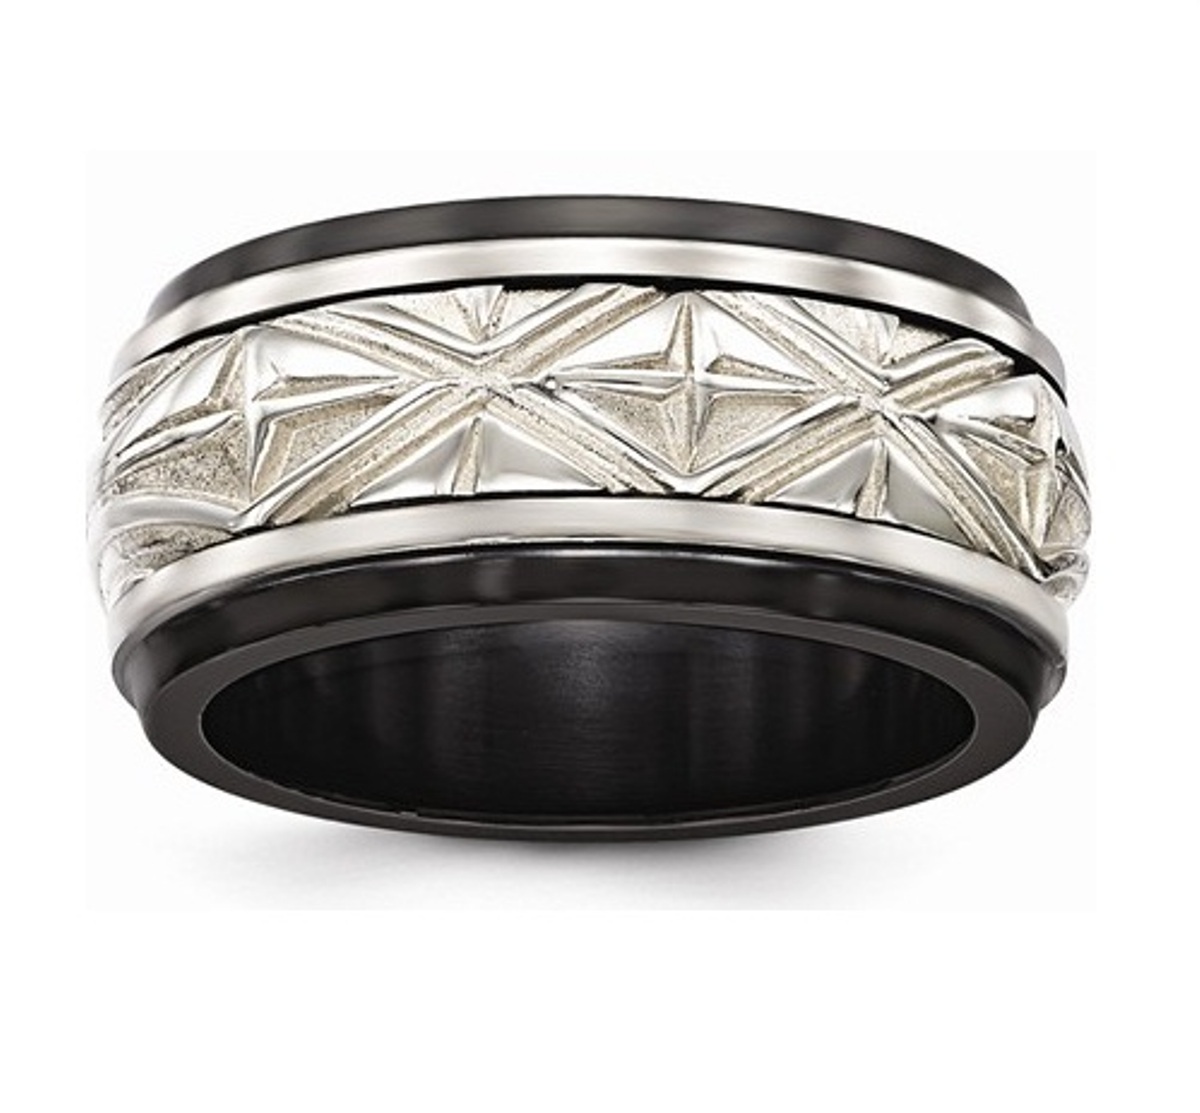  Black Ti And Sterling Silver Inlay Polished Fancy Design Ring